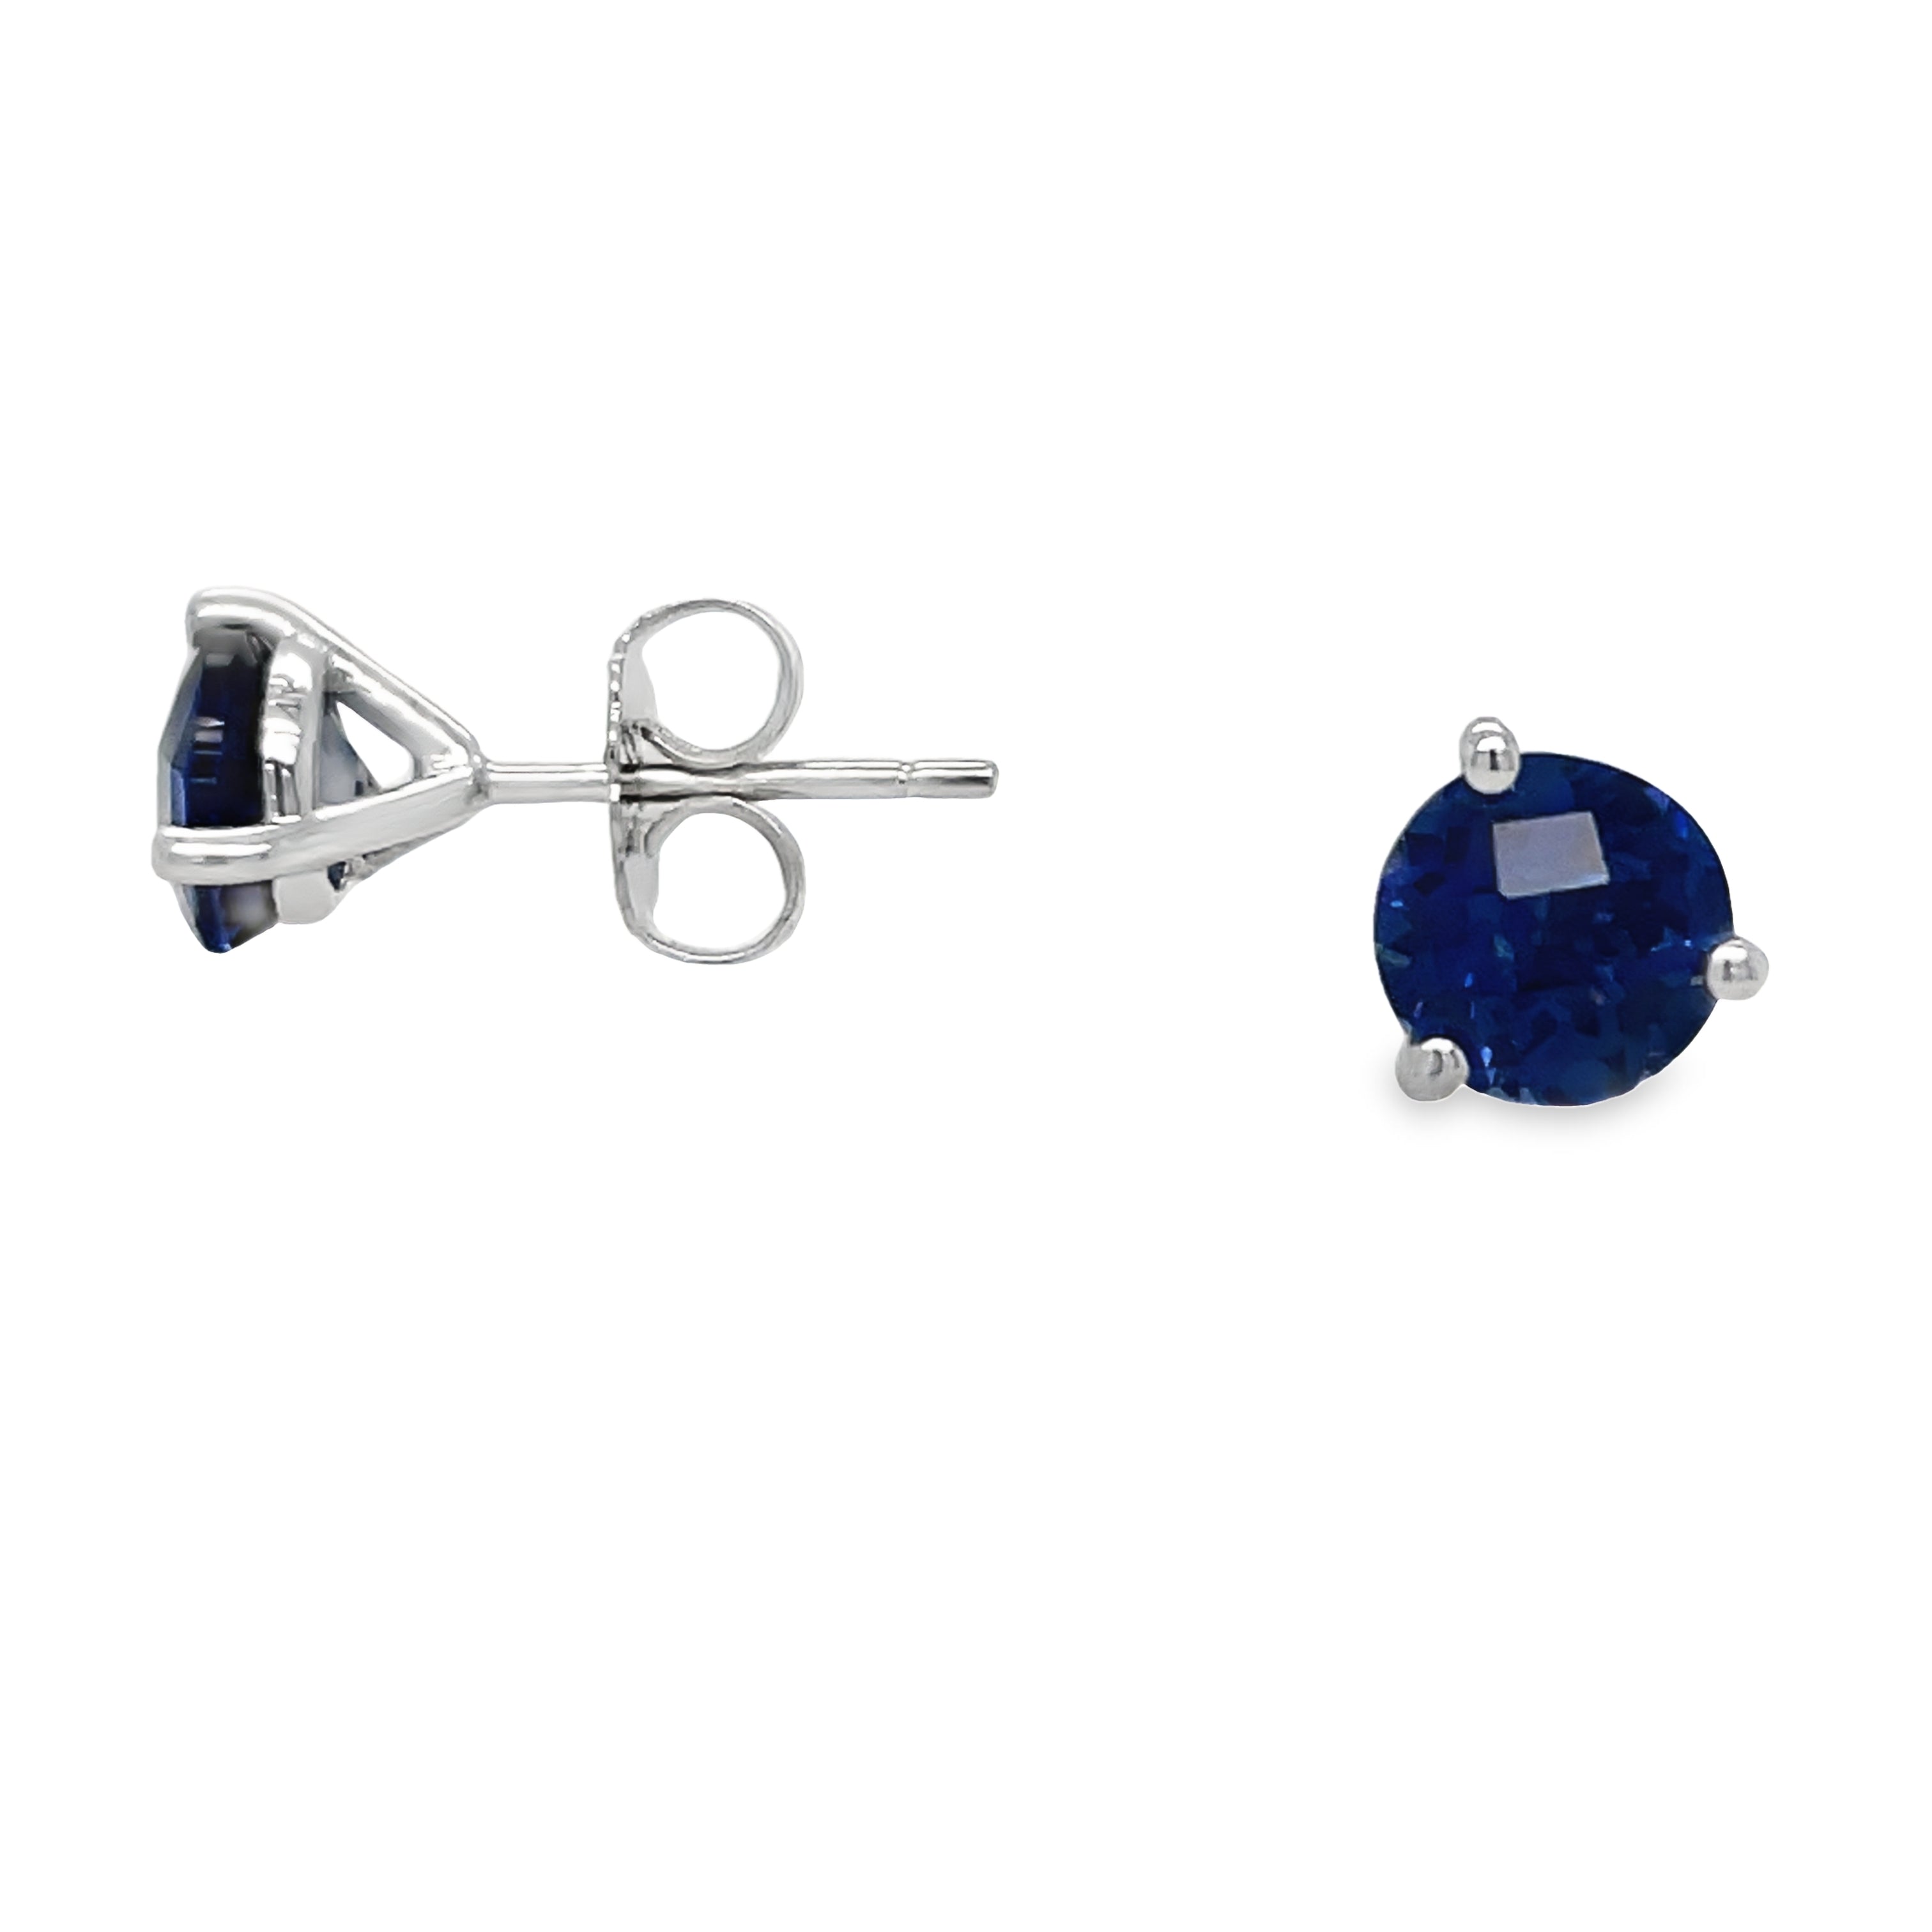 Add a touch of elegance to any outfit with our Blue Sapphire Stud Earrings. These stunning earrings feature high-quality 2.00 carat blue sapphires, set in a 14k white gold martini setting for maximum sparkle. Perfect for any occasion, these earrings are a timeless addition to any jewelry collection.